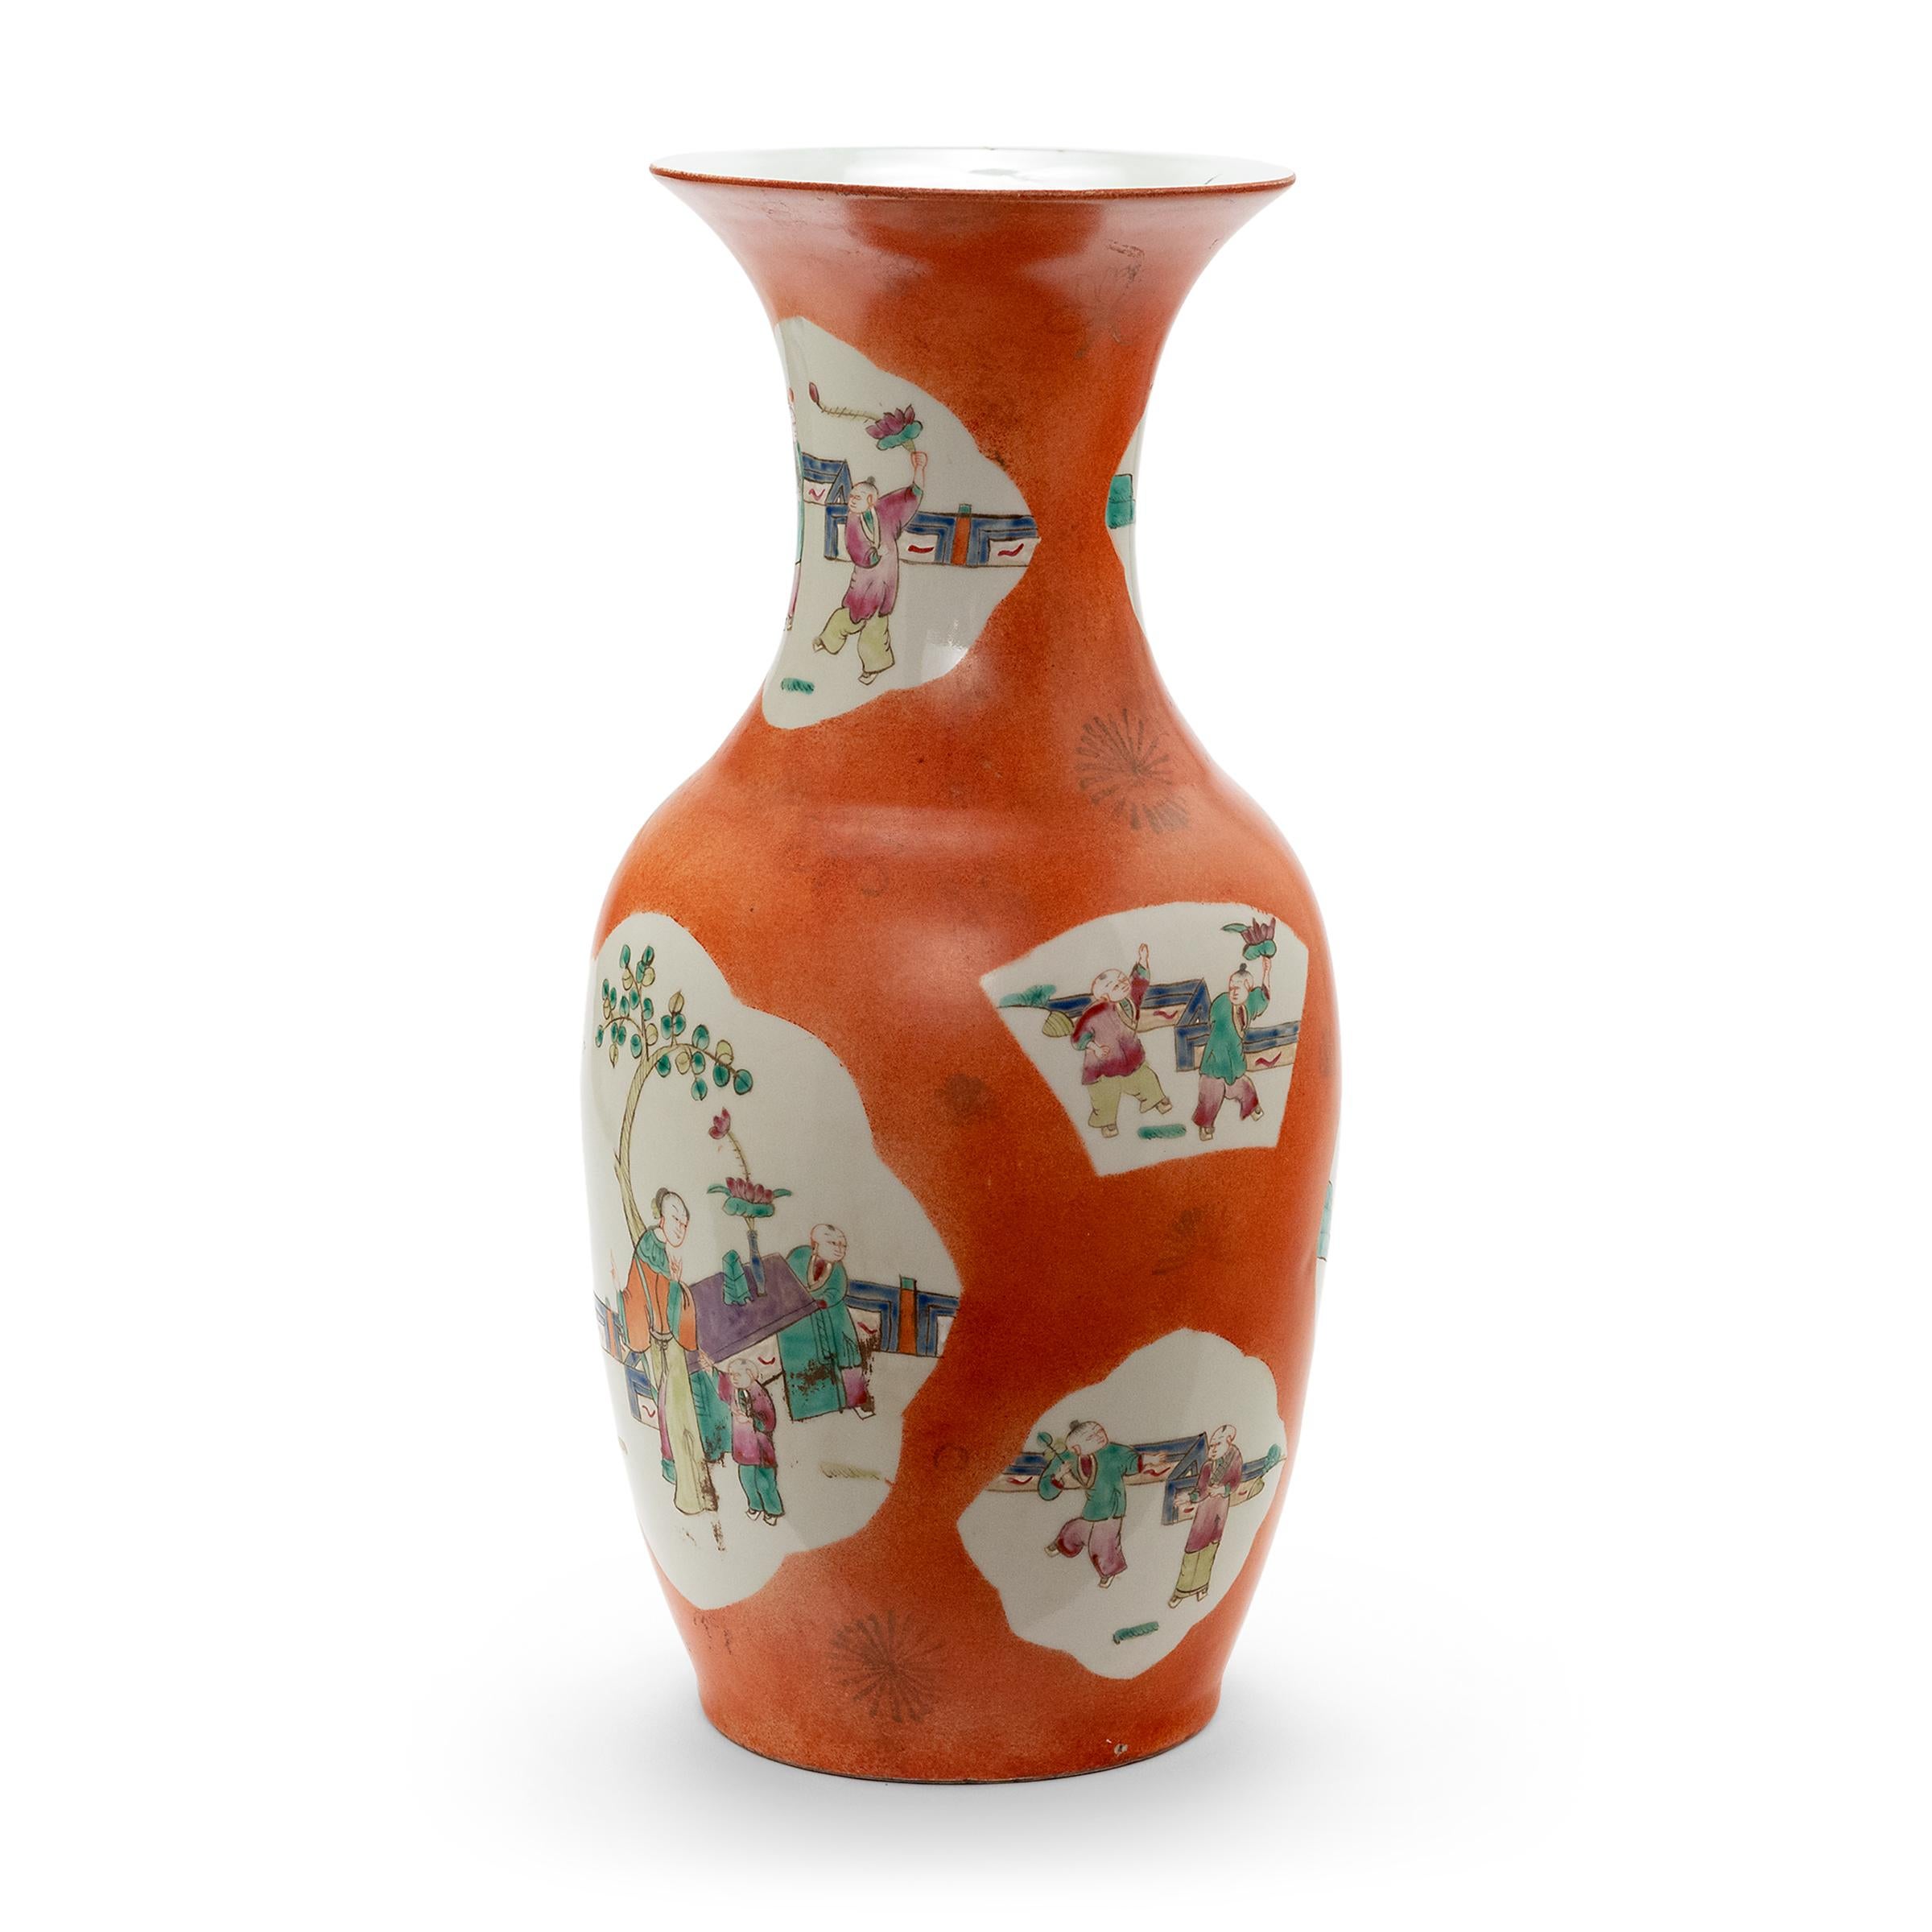 Chinese Export Persimmon Chinese Phoenix Tail Vase with Children at Play, c. 1920